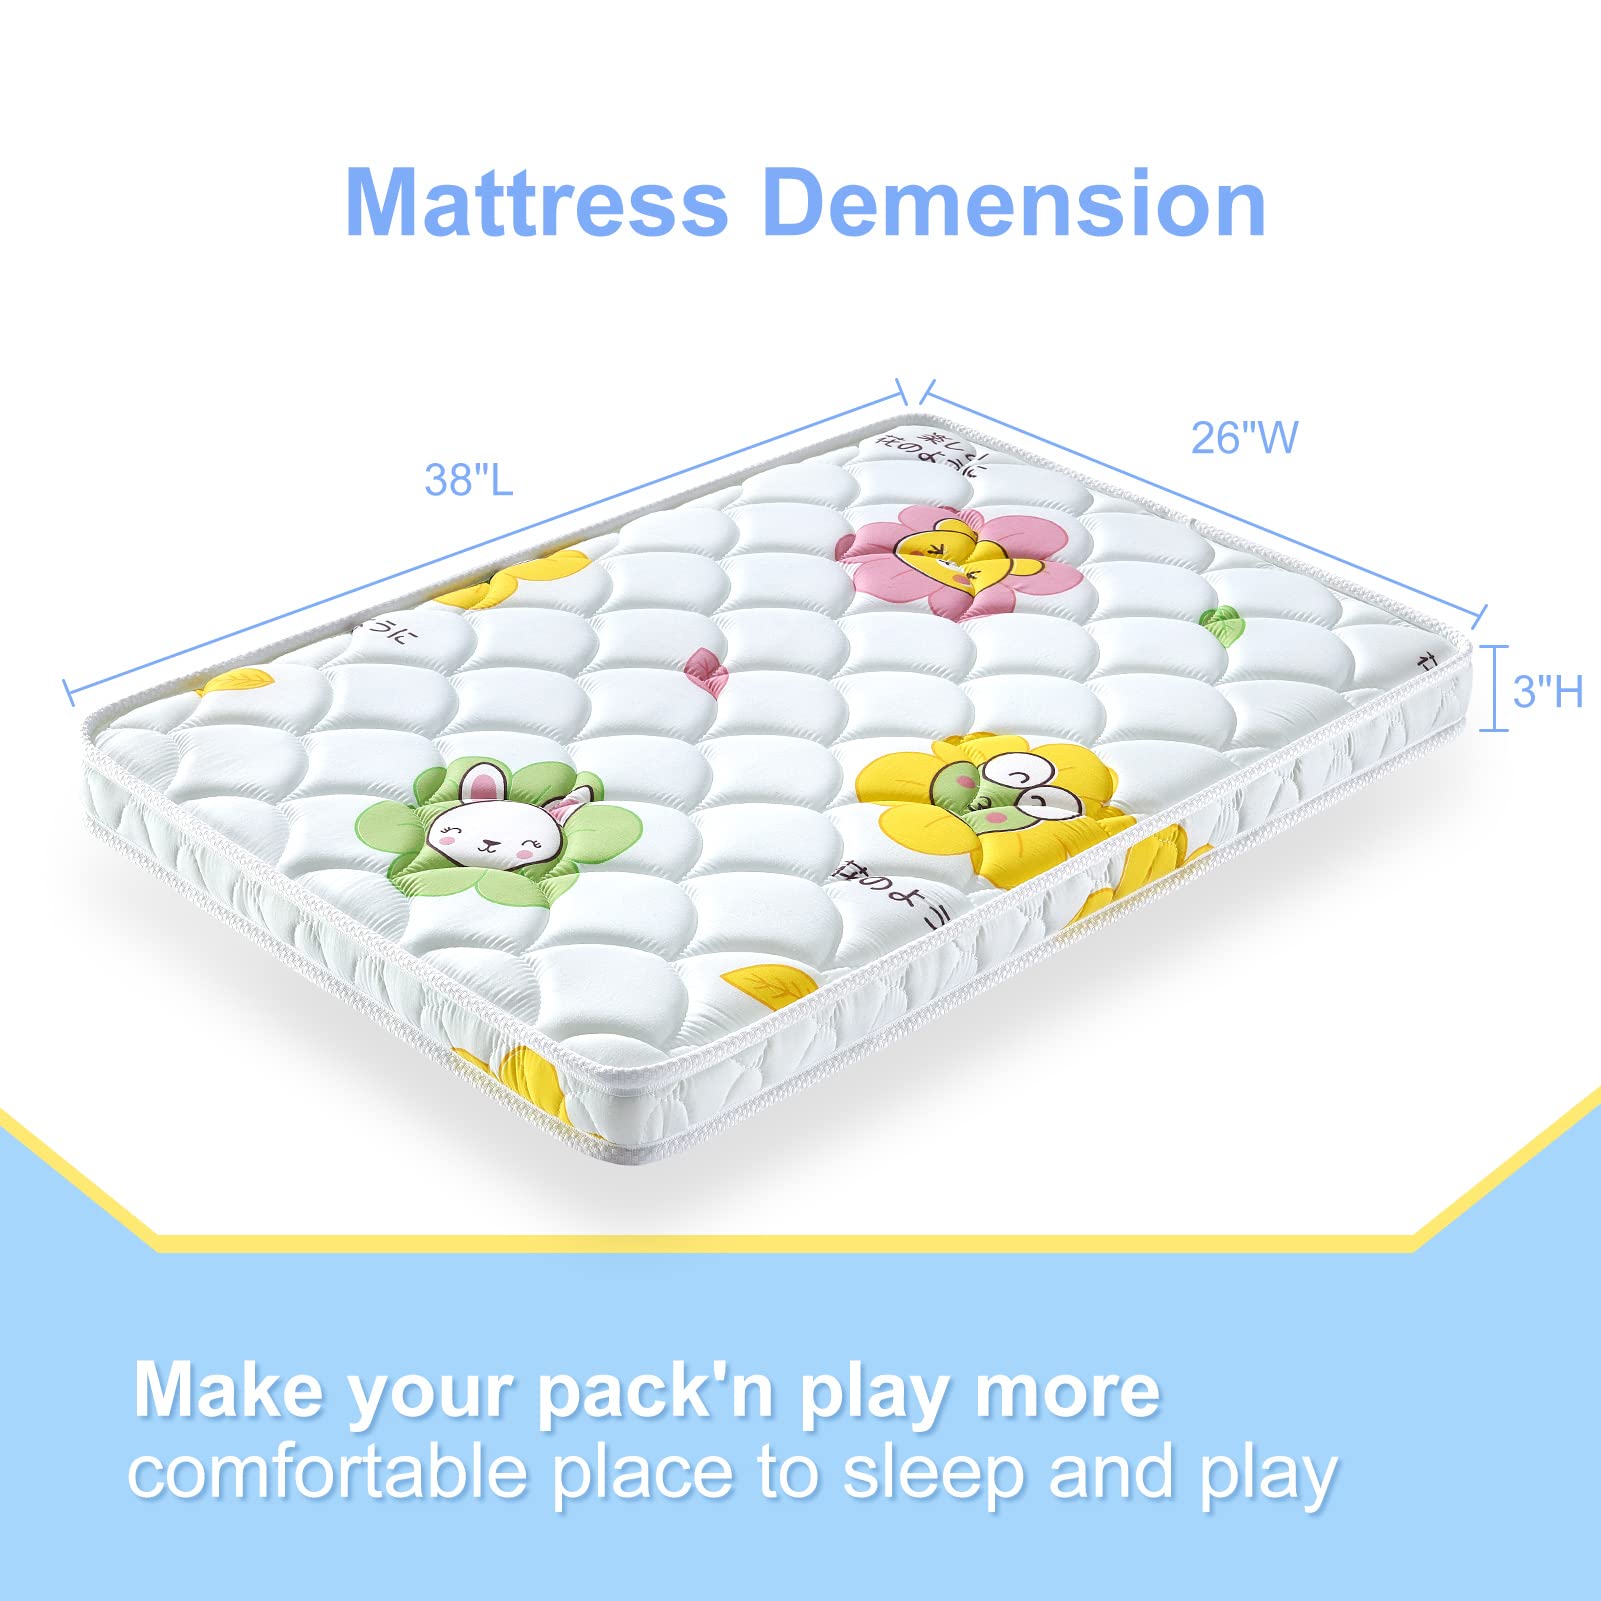 What Size Is The Perfect Mattress For Your Pack And Play?